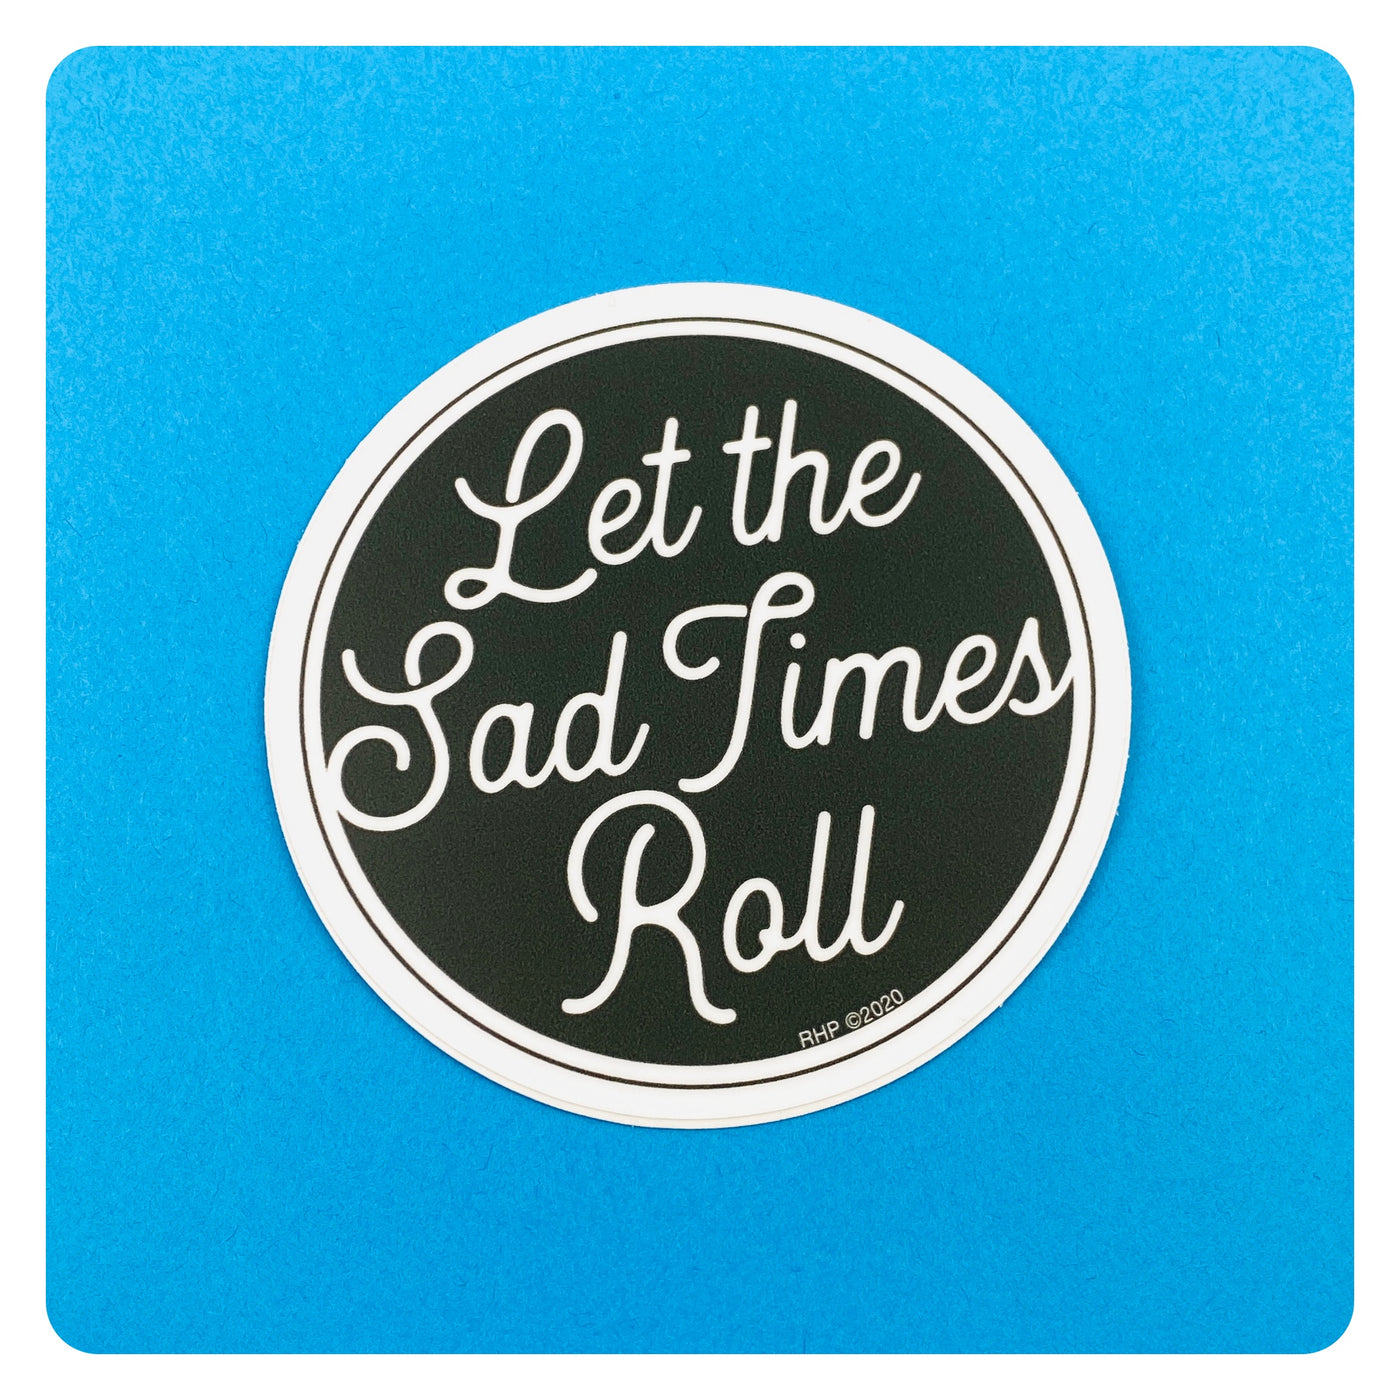 Let the Sad Times Roll Sticker